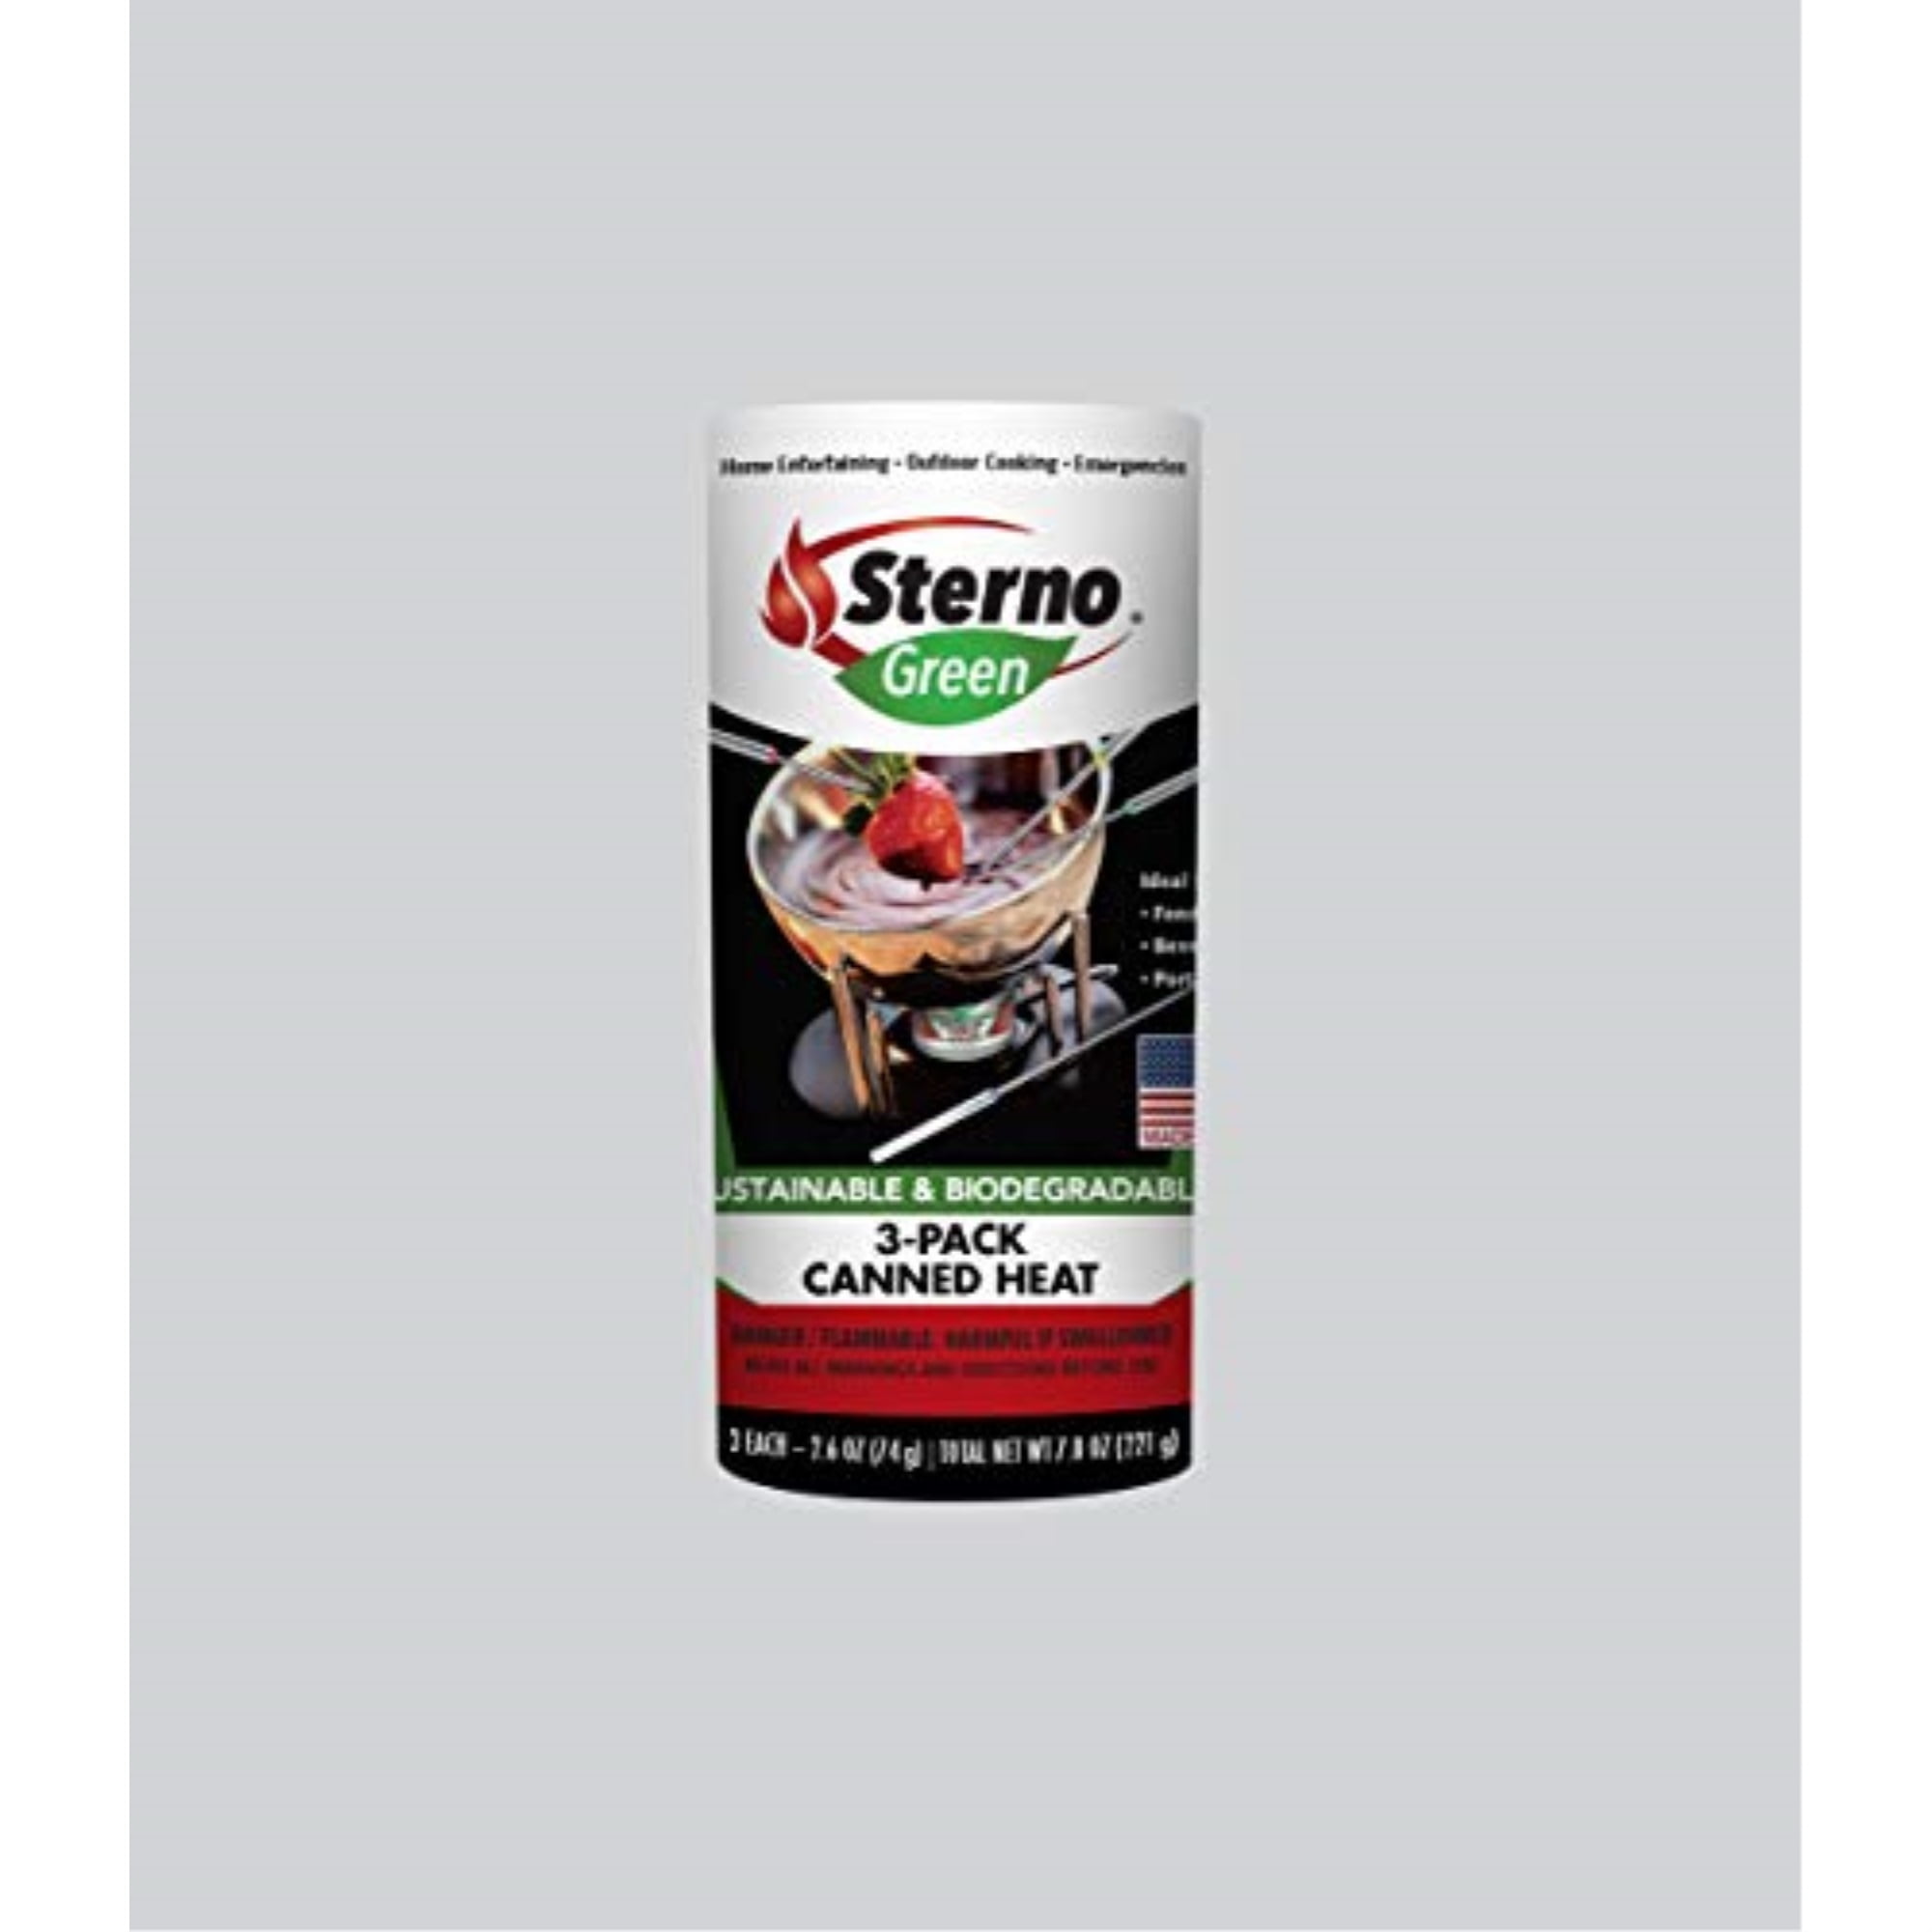 RECLOSEABLE STERNO TYPE EMERGENCY STOVE FUEL 4-6 HR BURN 24 CANS CAMP HEAT 